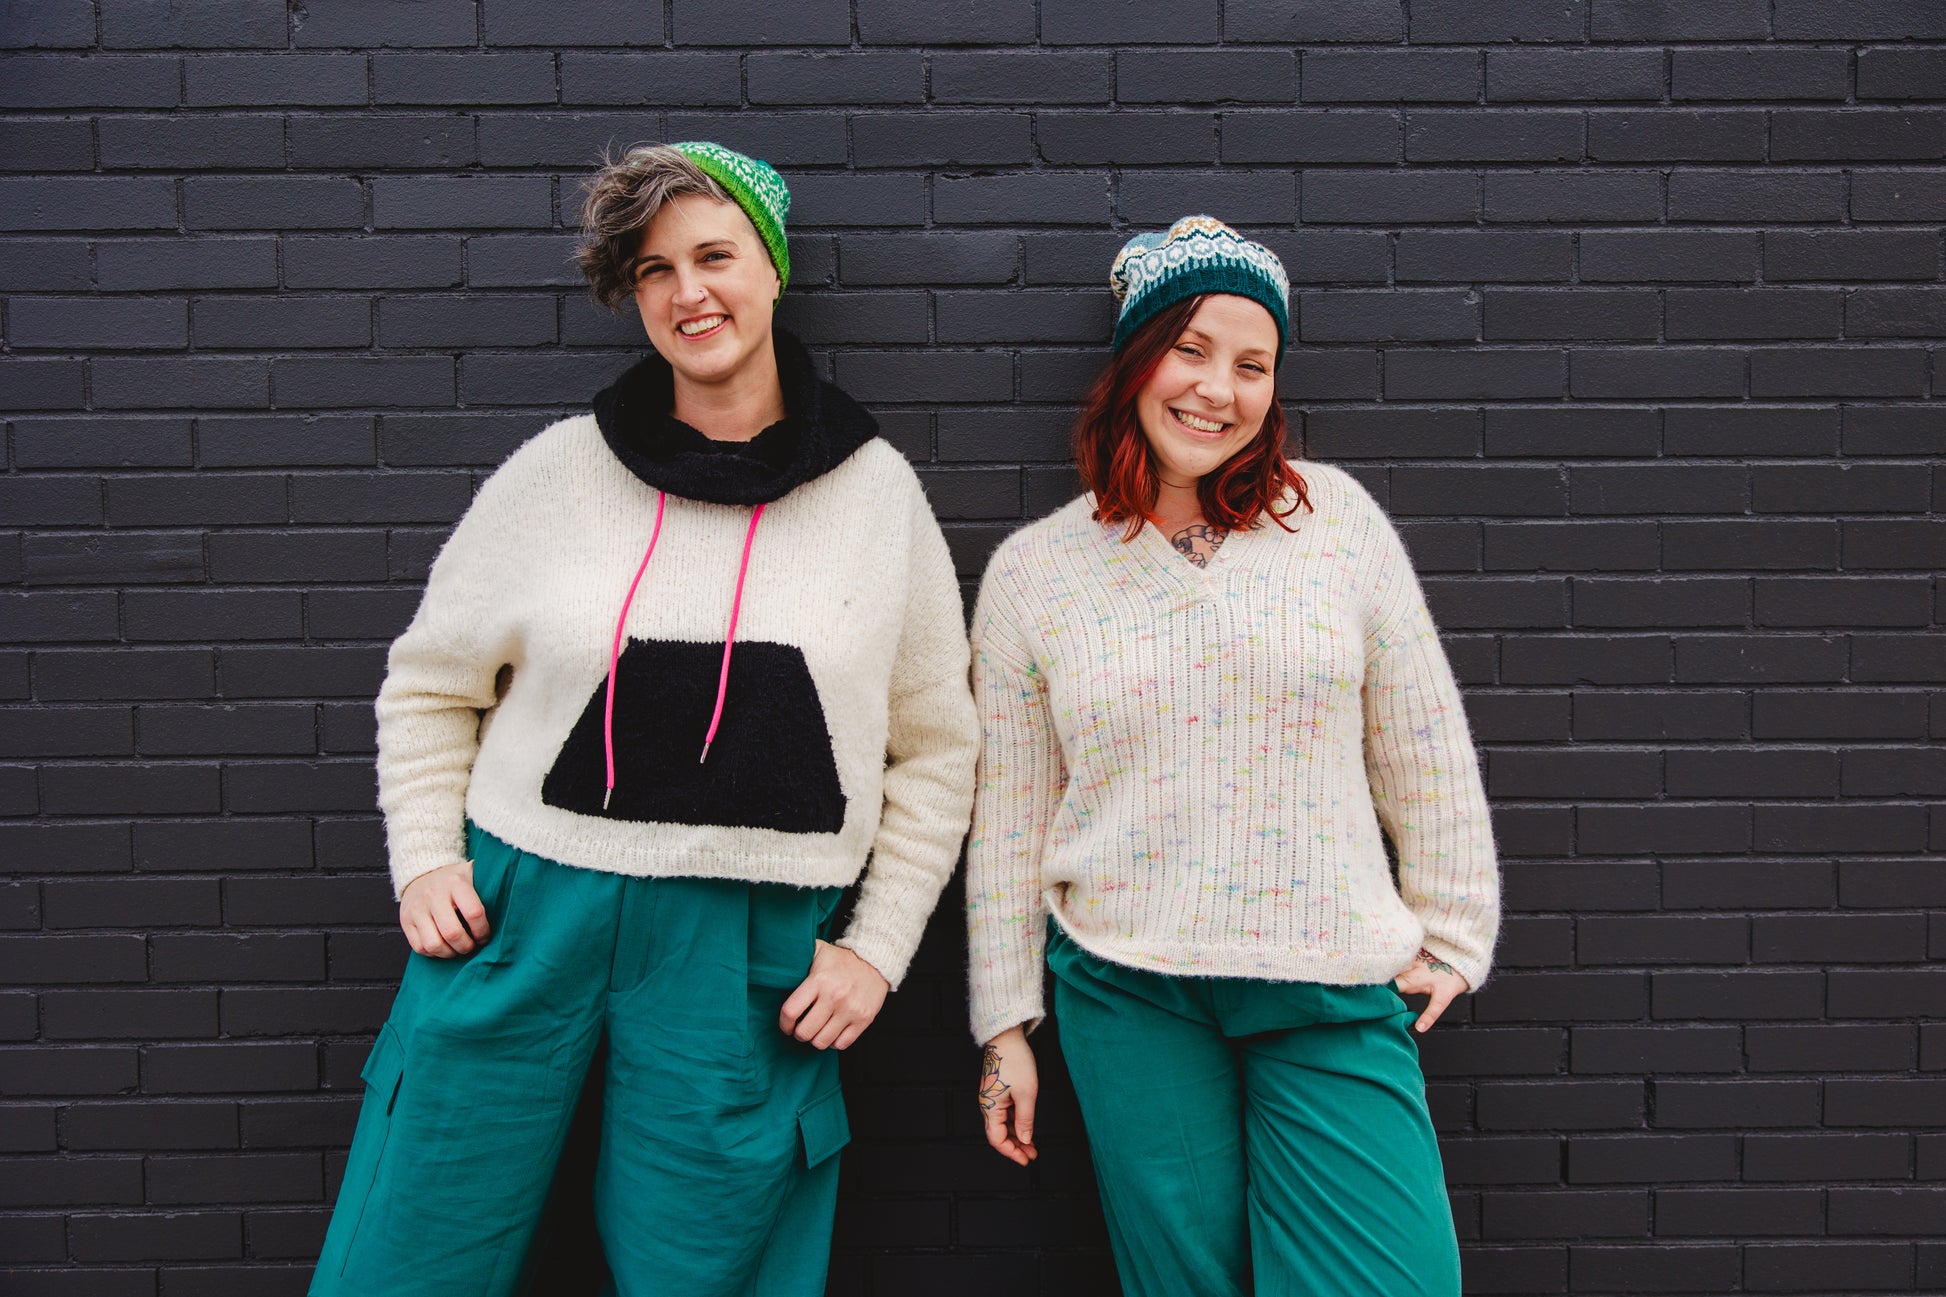 Jen and Bess stand against a brick wall, both grinning at the camera. Jen wears a black and white knit hoodie with a pink hoodie tie, along with a colorwork green and white knit hat. Beside her, Bess wears a white knit henley, made with yarn that has pieces of rainbow tweed, with a blue, orange, and white colorwork knit hat. They both wear matching teal pants.